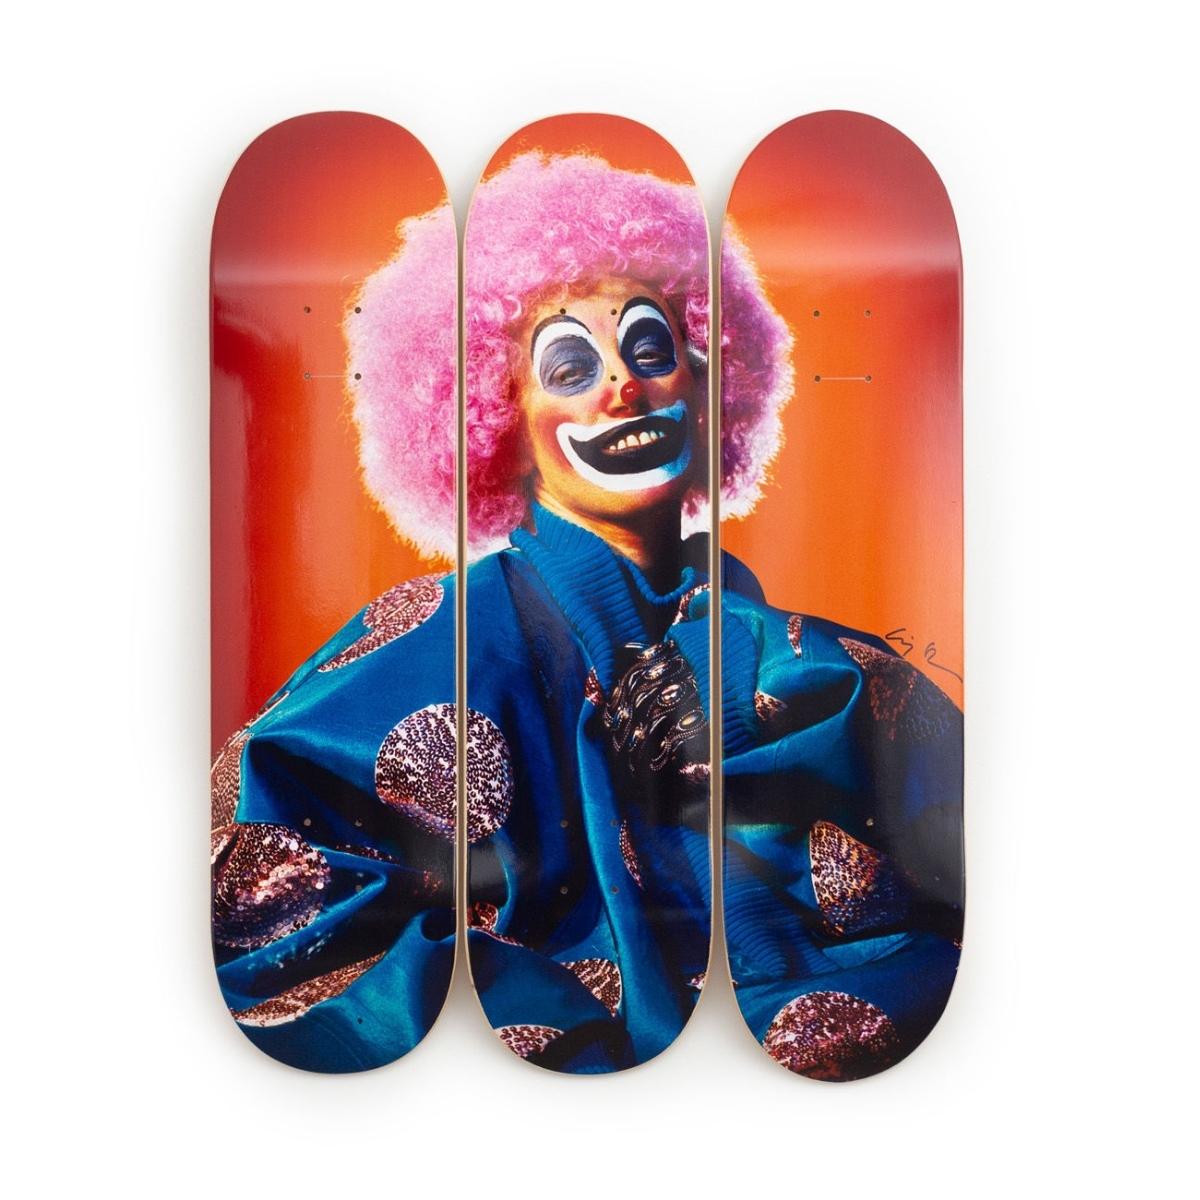 The Skateroom x Cindy Sherman - Untitled #414 (Clown) - HAND-SIGNED